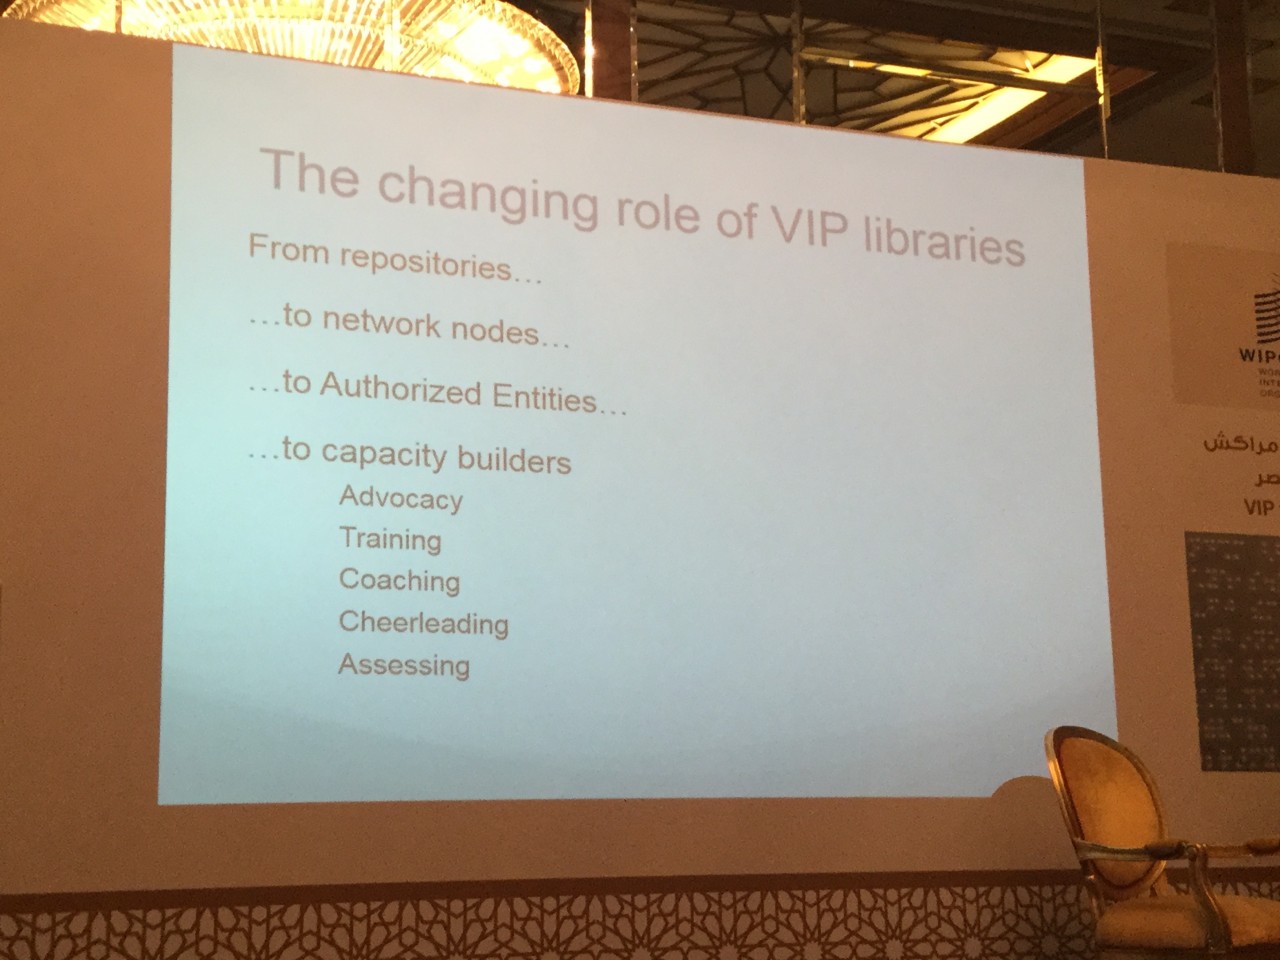 Slide on the changing role of libraries under Marrakesh